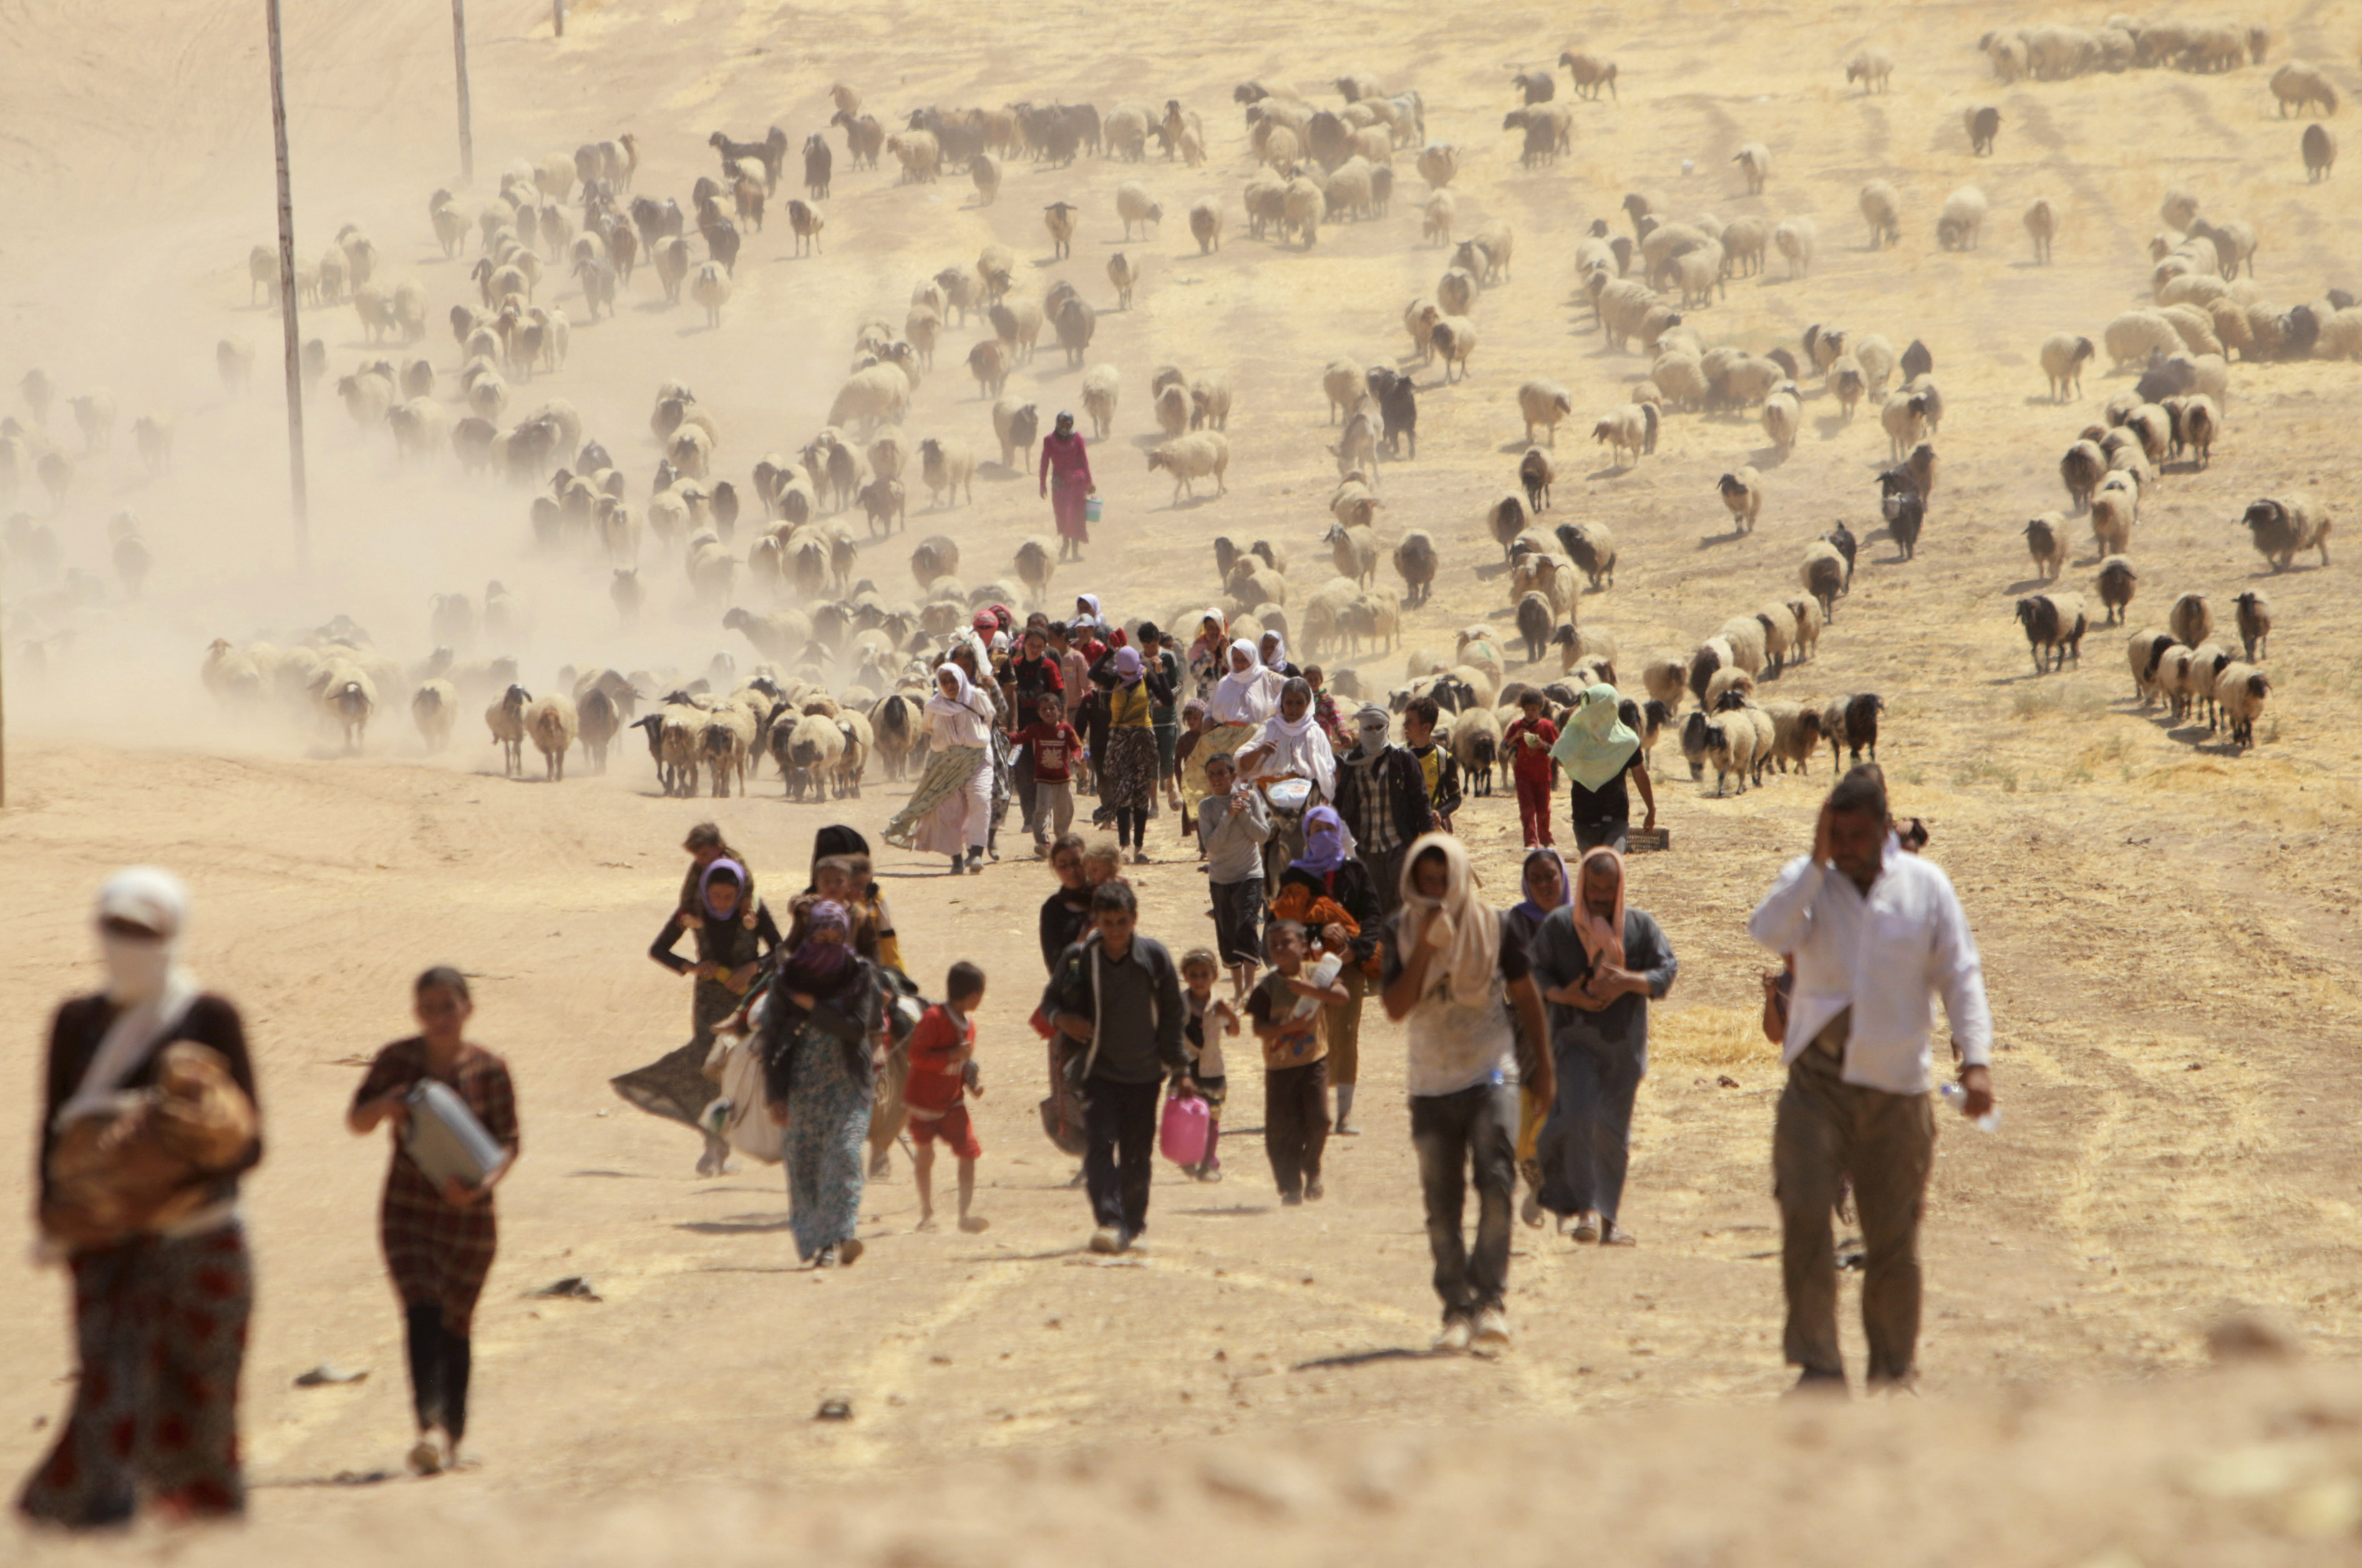 Displaced people from the minority Yazidi sect, fleeing violence from forces loyal to the Islamic State in Sinjar town, walk towards the Syrian border, on the outskirts of Sinjar mountain, near the Syrian border town of Elierbeh of Al-Hasakah Governorate August 10, 2014. Islamic State militants have killed at least 500 members of Iraq's Yazidi ethnic minority during their offensive in the north, Iraq's human rights minister told Reuters on Sunday. The Islamic State, which has declared a caliphate in parts of Iraq and Syria, has prompted tens of thousands of Yazidis and Christians to flee for their lives during their push to within a 30-minute drive of the Kurdish regional capital Arbil. Picture taken August 10, 2014. REUTERS/Rodi Said (IRAQ - Tags: POLITICS CIVIL UNREST CONFLICT TPX IMAGES OF THE DAY) - RTR41YW4